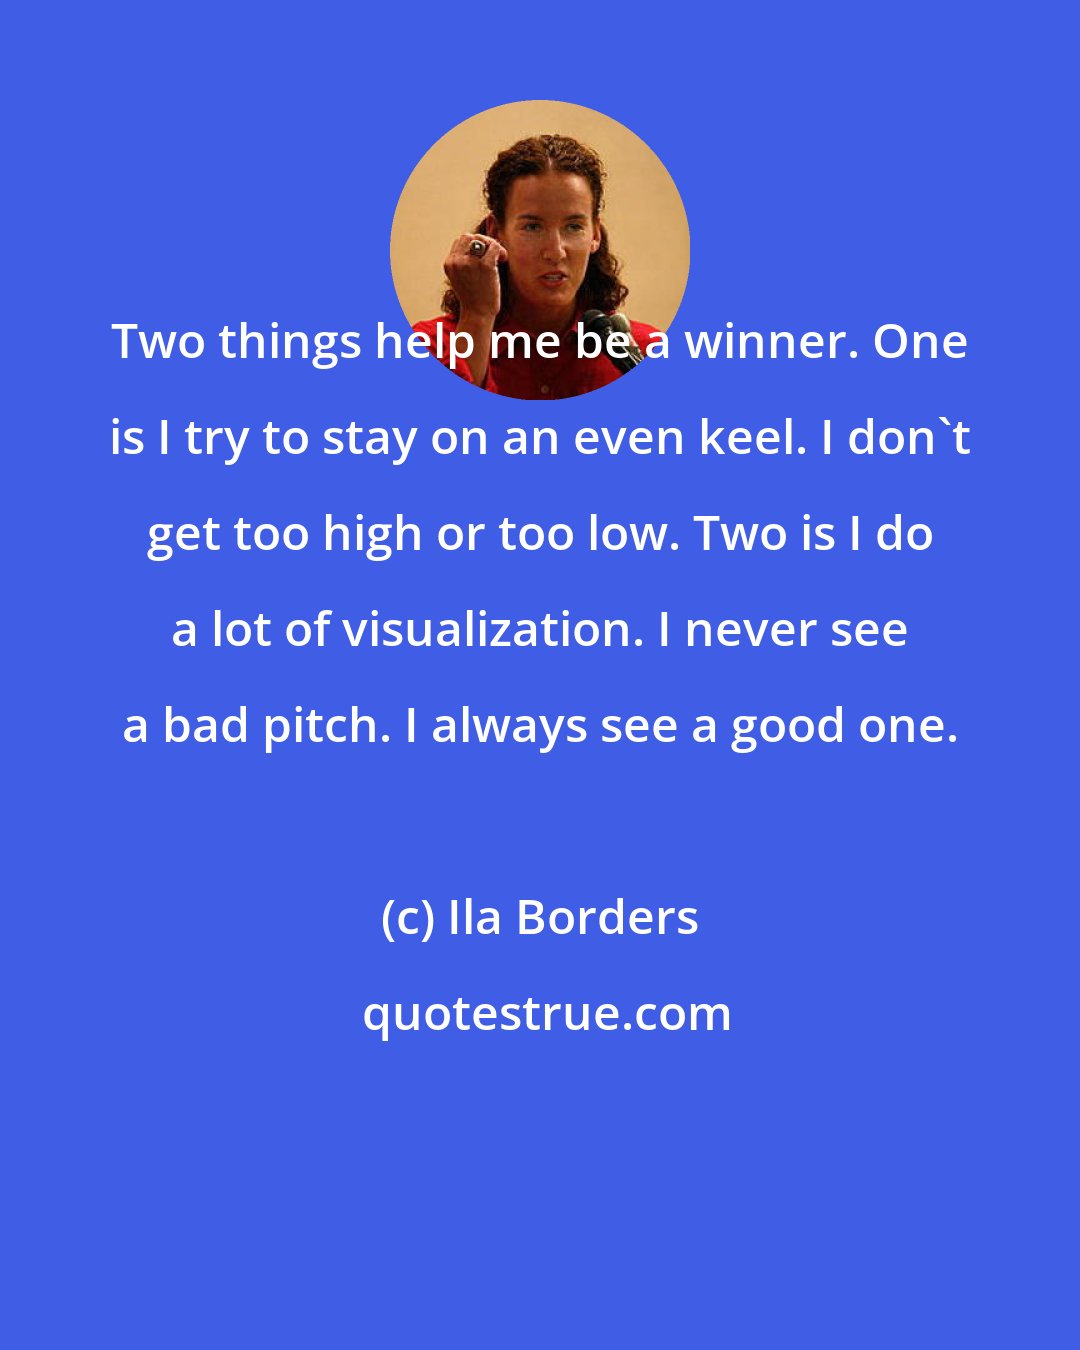 Ila Borders: Two things help me be a winner. One is I try to stay on an even keel. I don't get too high or too low. Two is I do a lot of visualization. I never see a bad pitch. I always see a good one.